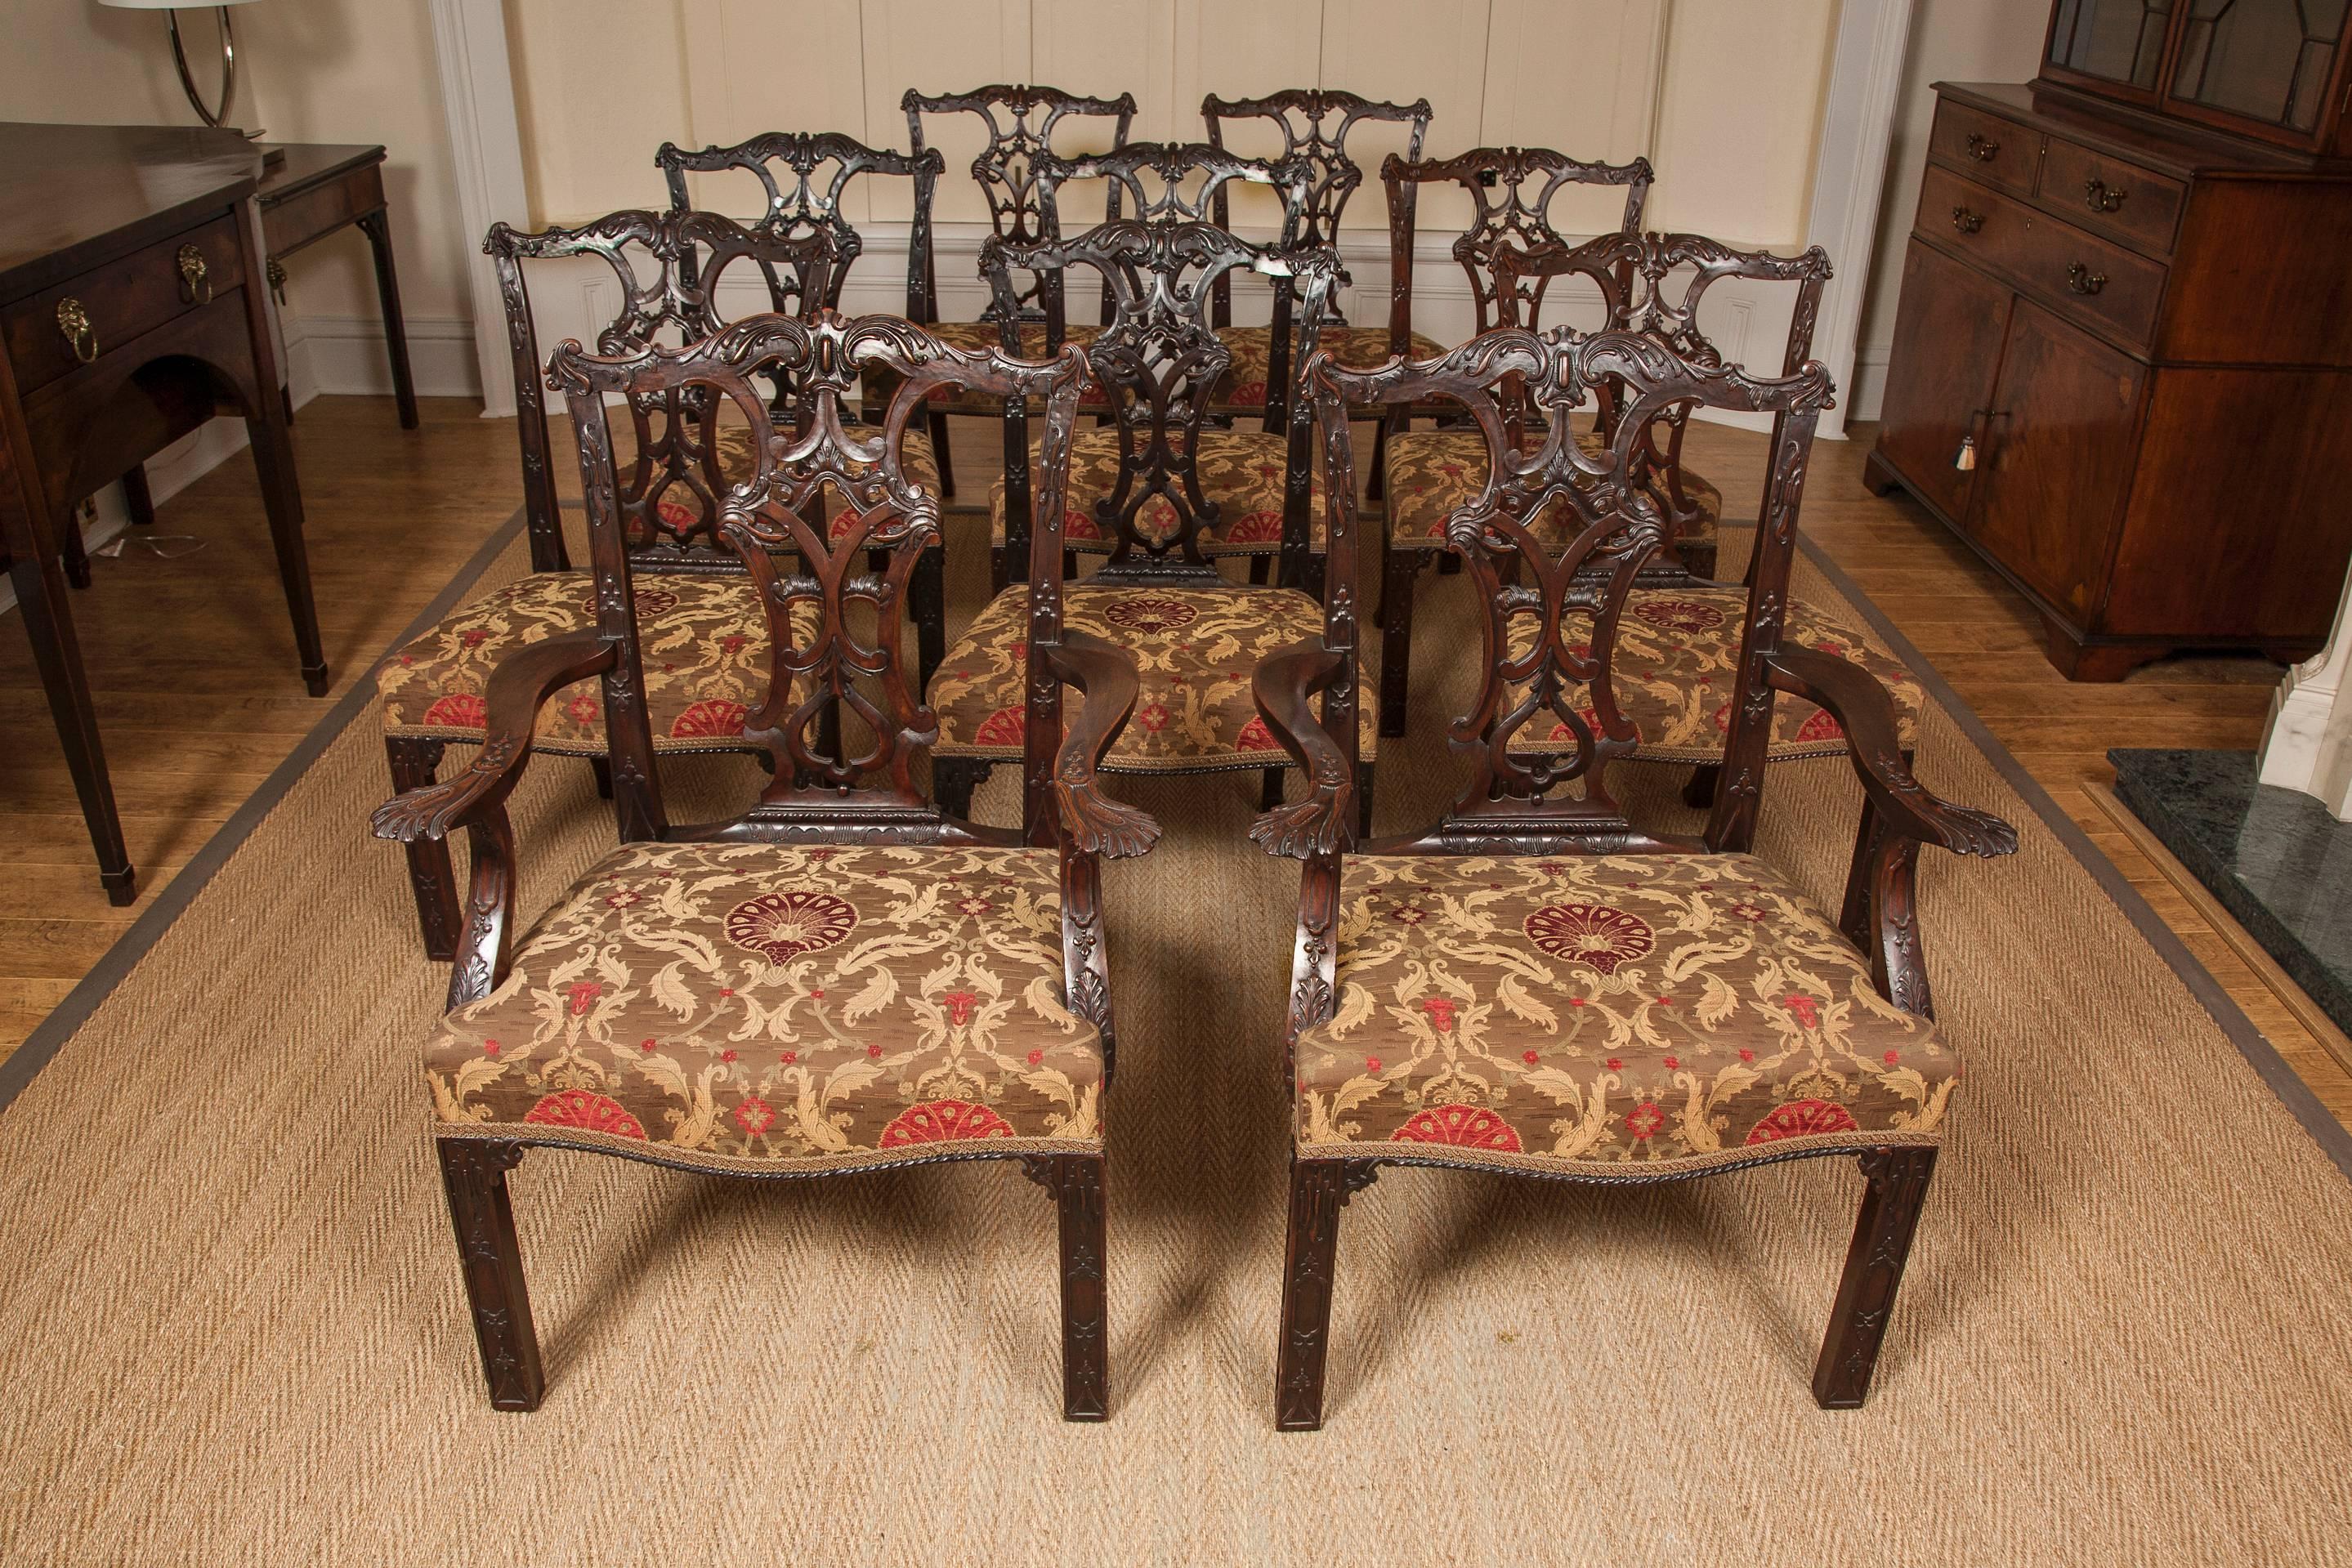 This superb set of chairs in the Chippendale manner with carved and pierced splat backs, serpentine front seat rails, blind fret moulded front legs and splay back legs. The two carvers with wonderful carved outswept arms and supports.
Of exceptional